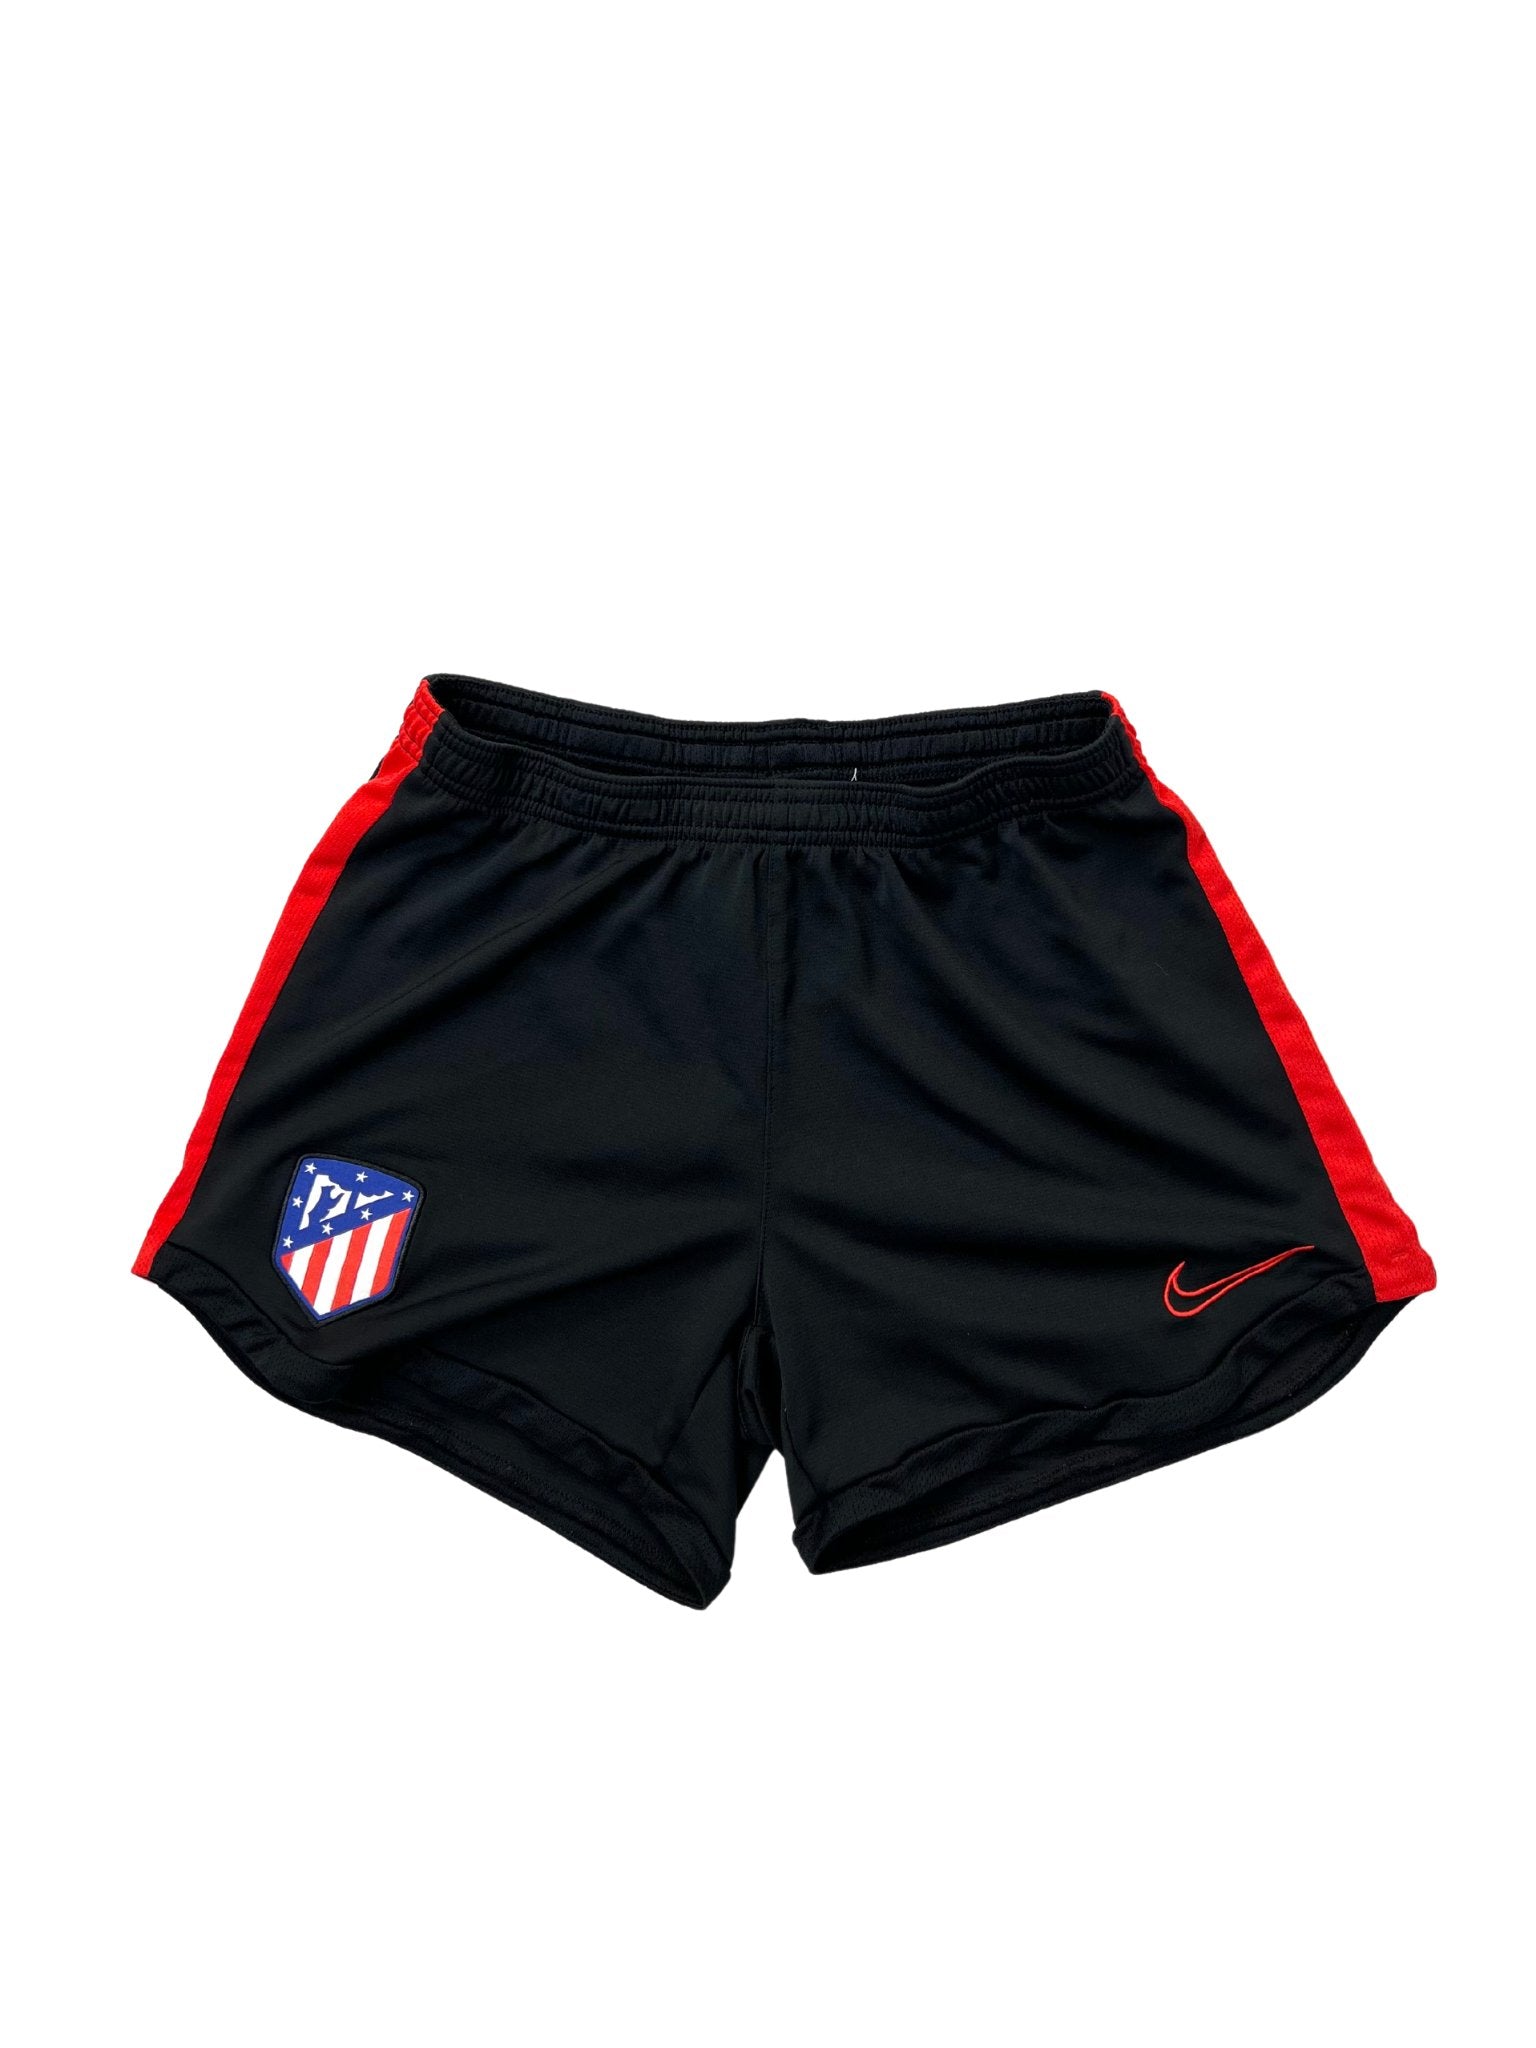 Atletico Madrid Away Shorts Women's M-Unwanted FC-stride